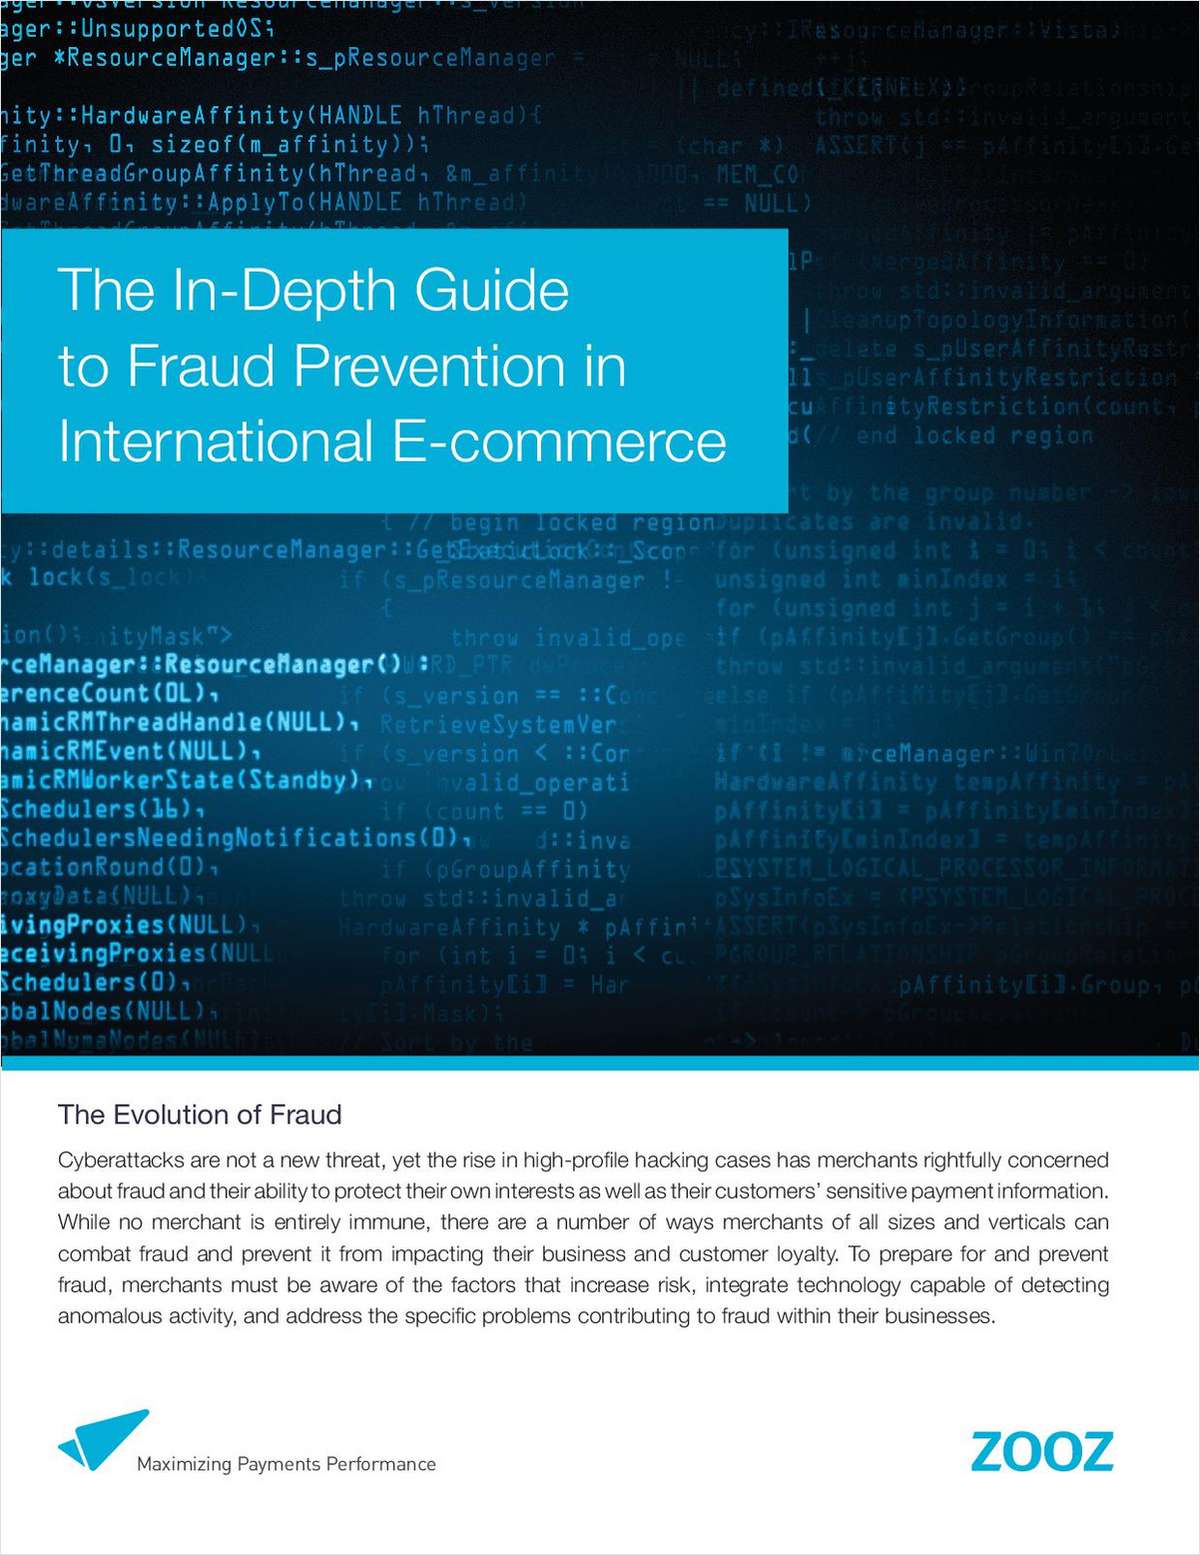 The In-Depth Guide to Fraud Prevention in International E-commerce